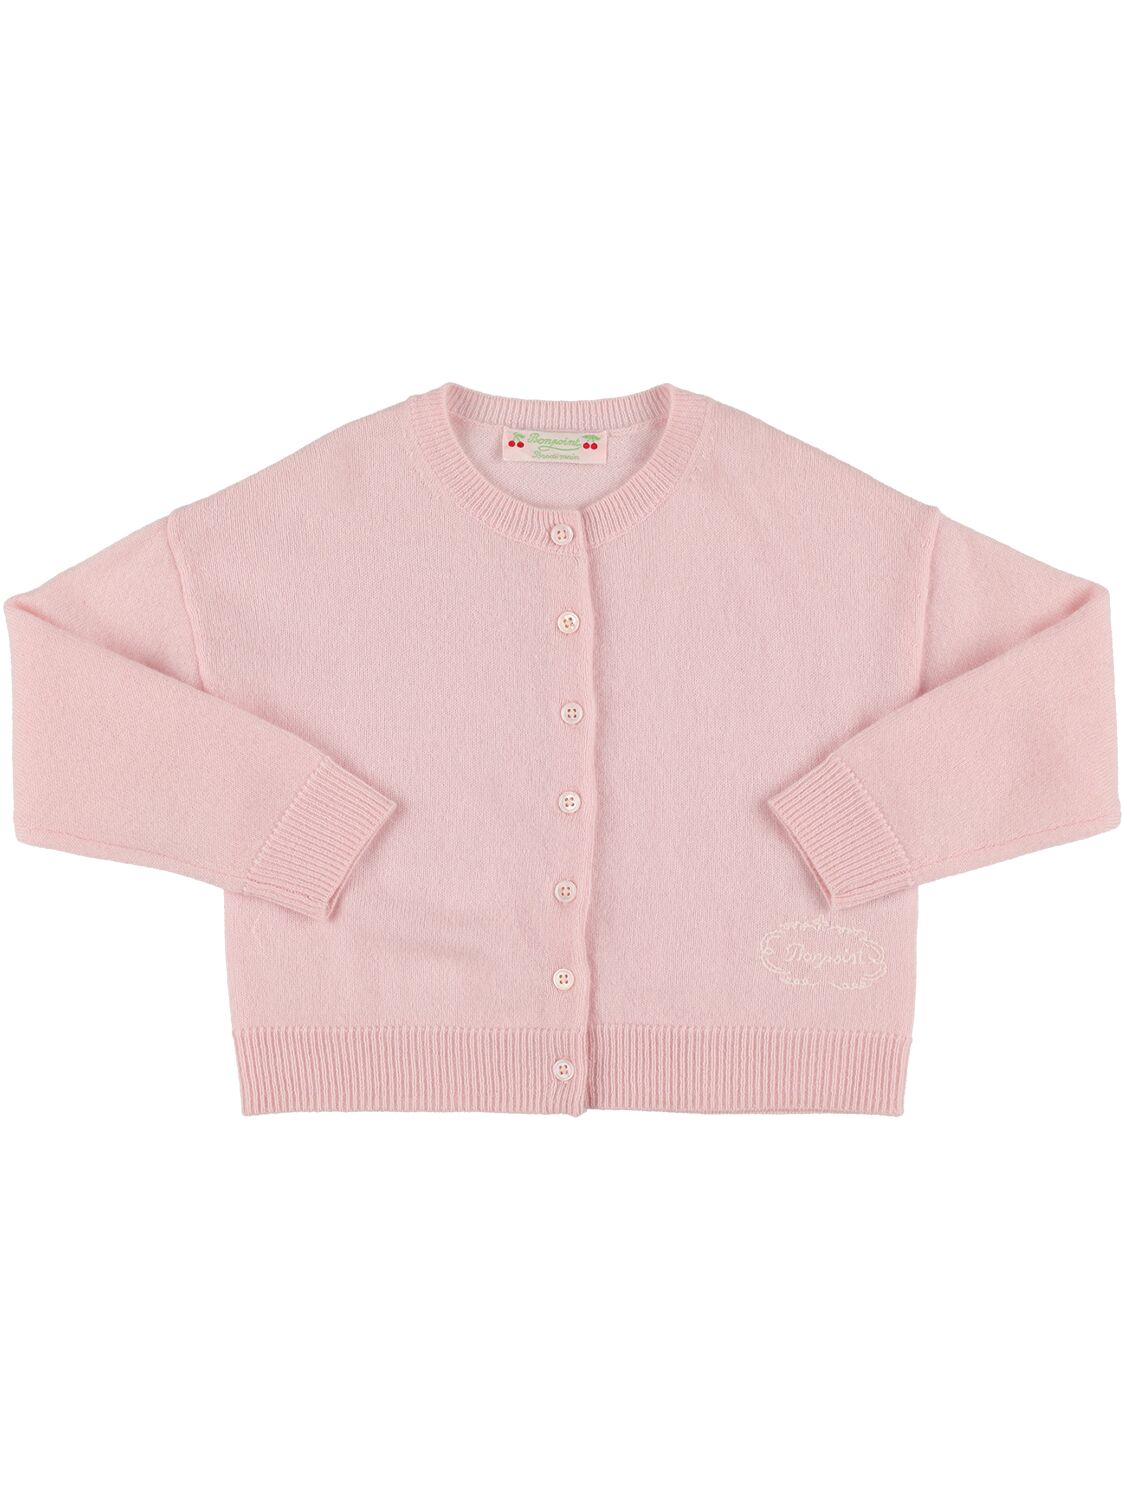 Bonpoint Kids' Cashmere Cardigan In Pink